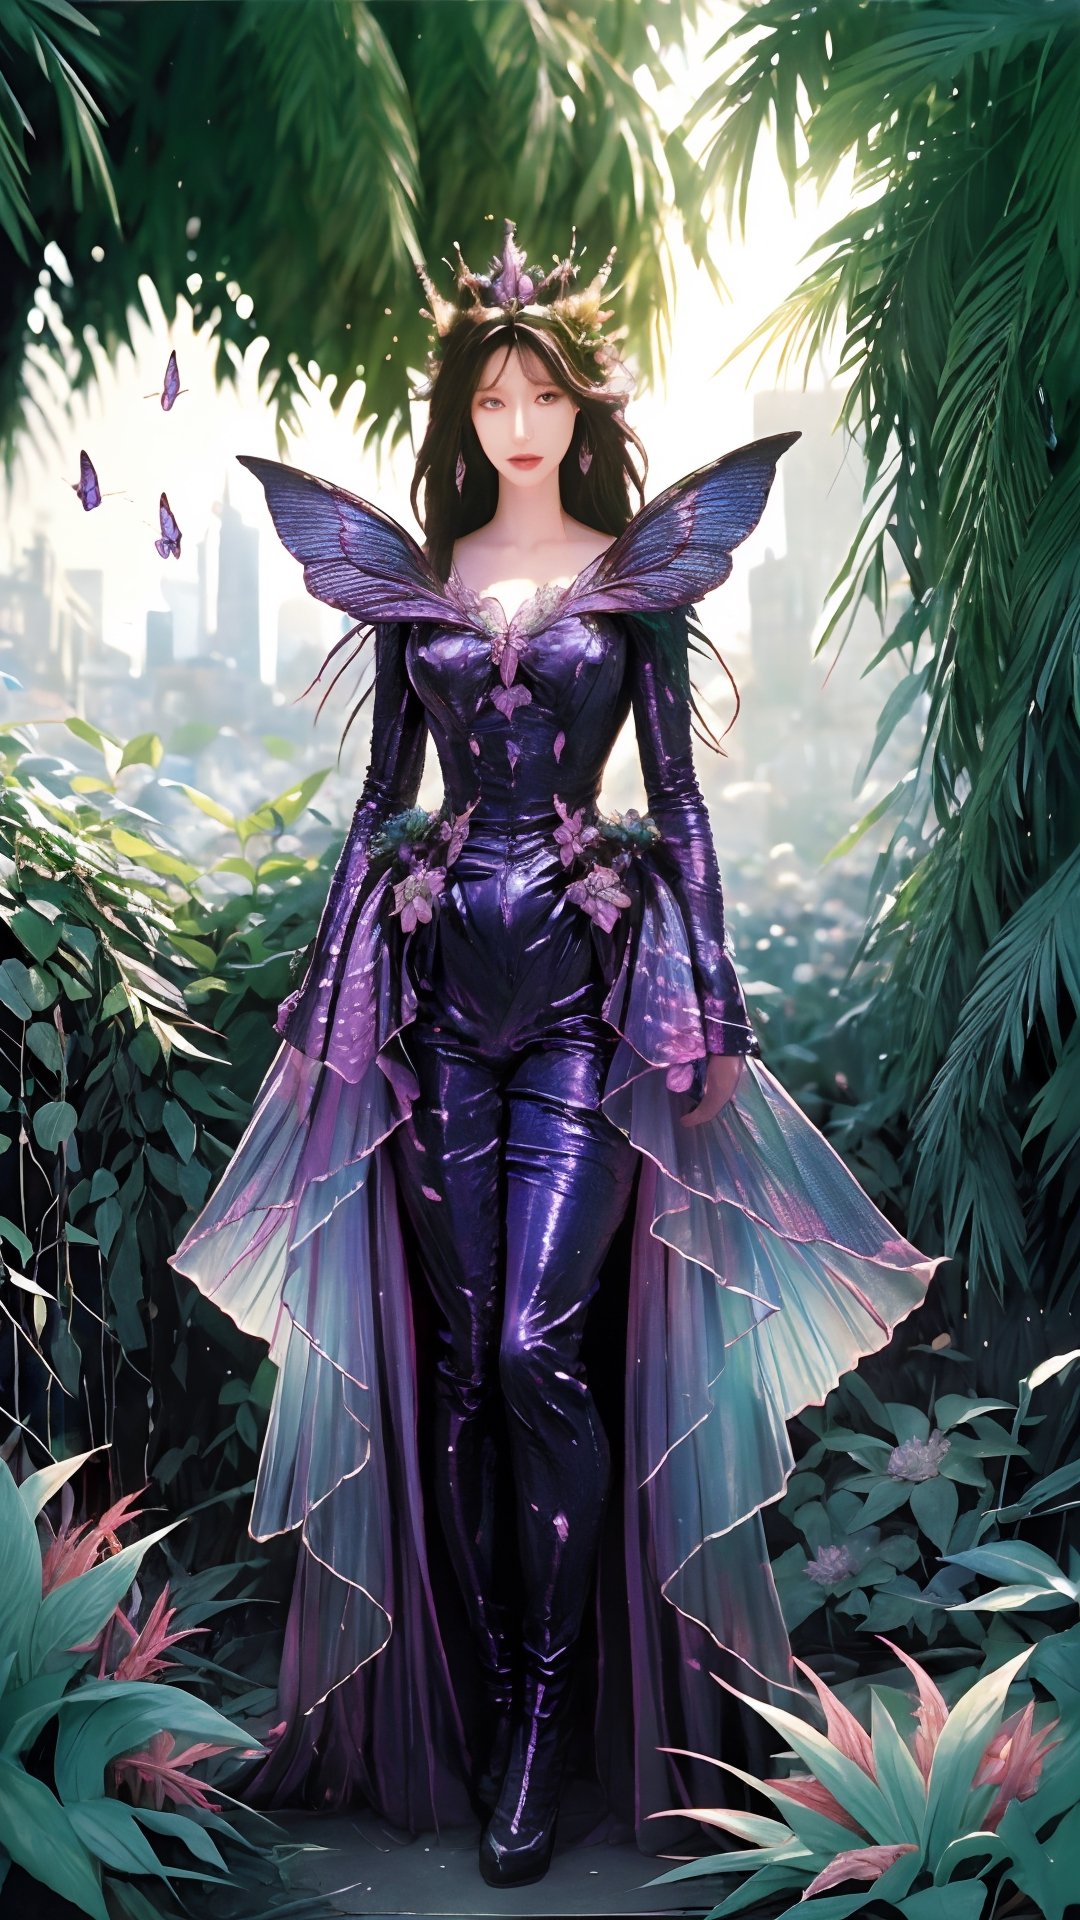  hyper realistic image of a portrayal of an eldritch insect queen metamorph monster transforming in a forgotten garden overrun with twisted flora. Illuminate the scene with surreal, otherworldly colors as the creature undergoes its metamorphic stages.